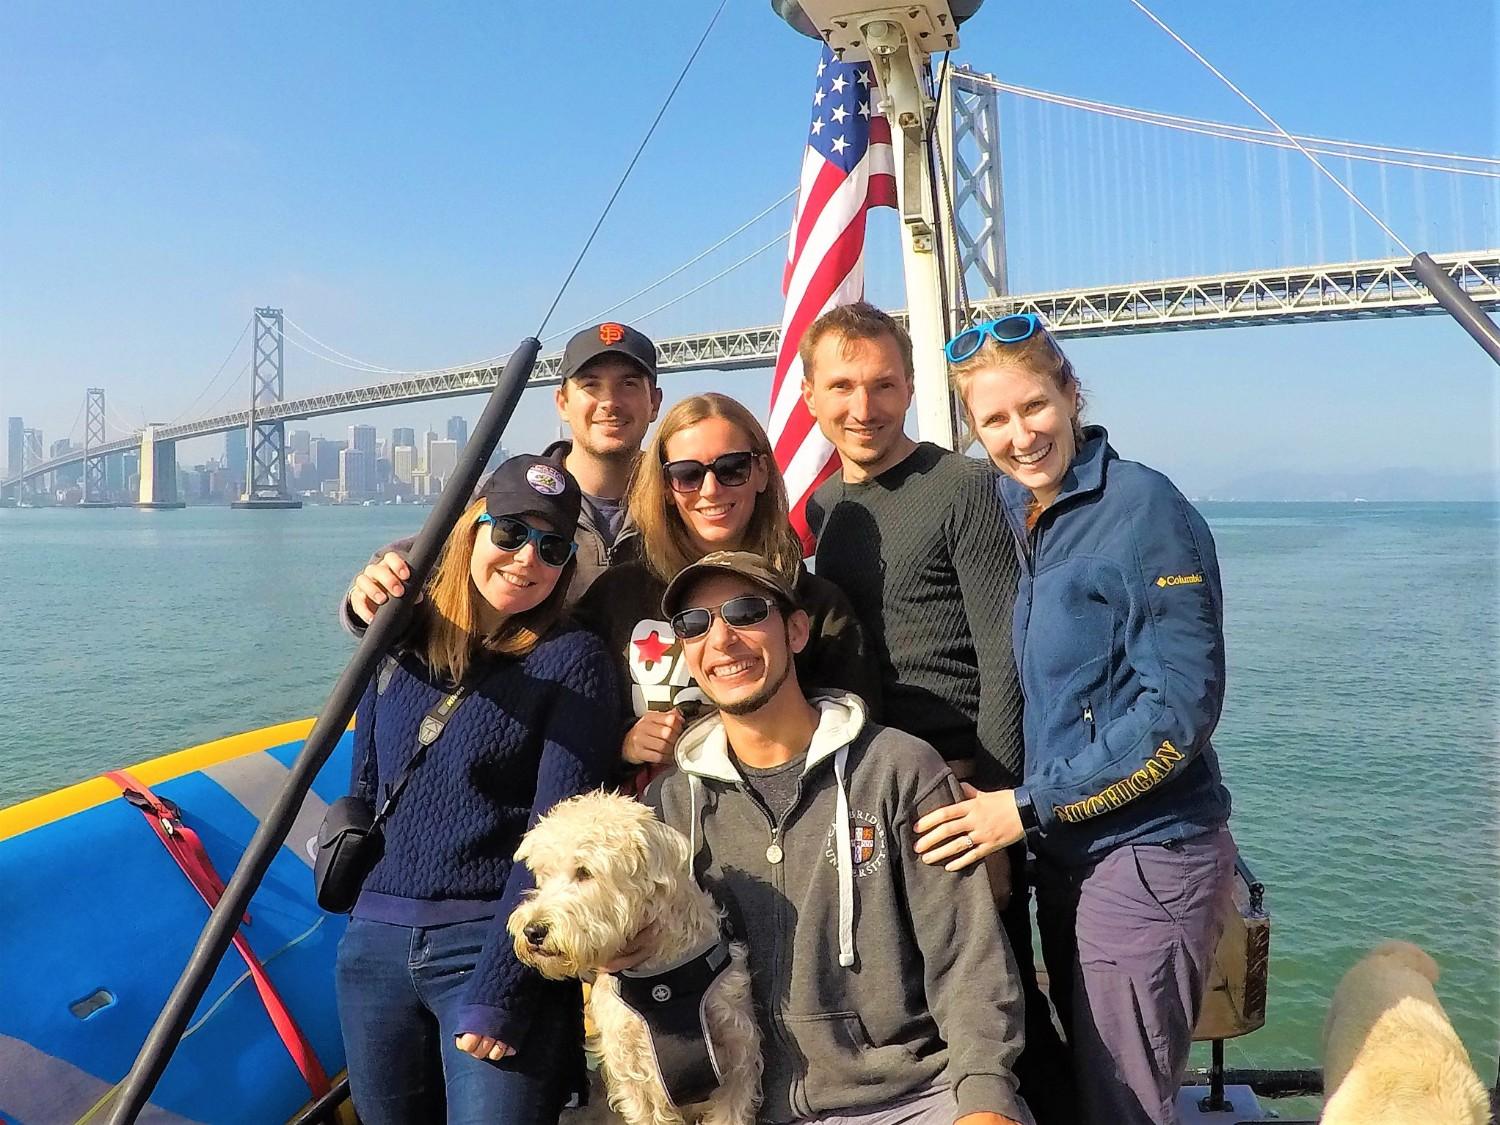 All Paws on Deck for a Pet-Friendly Day Cruise With Fido